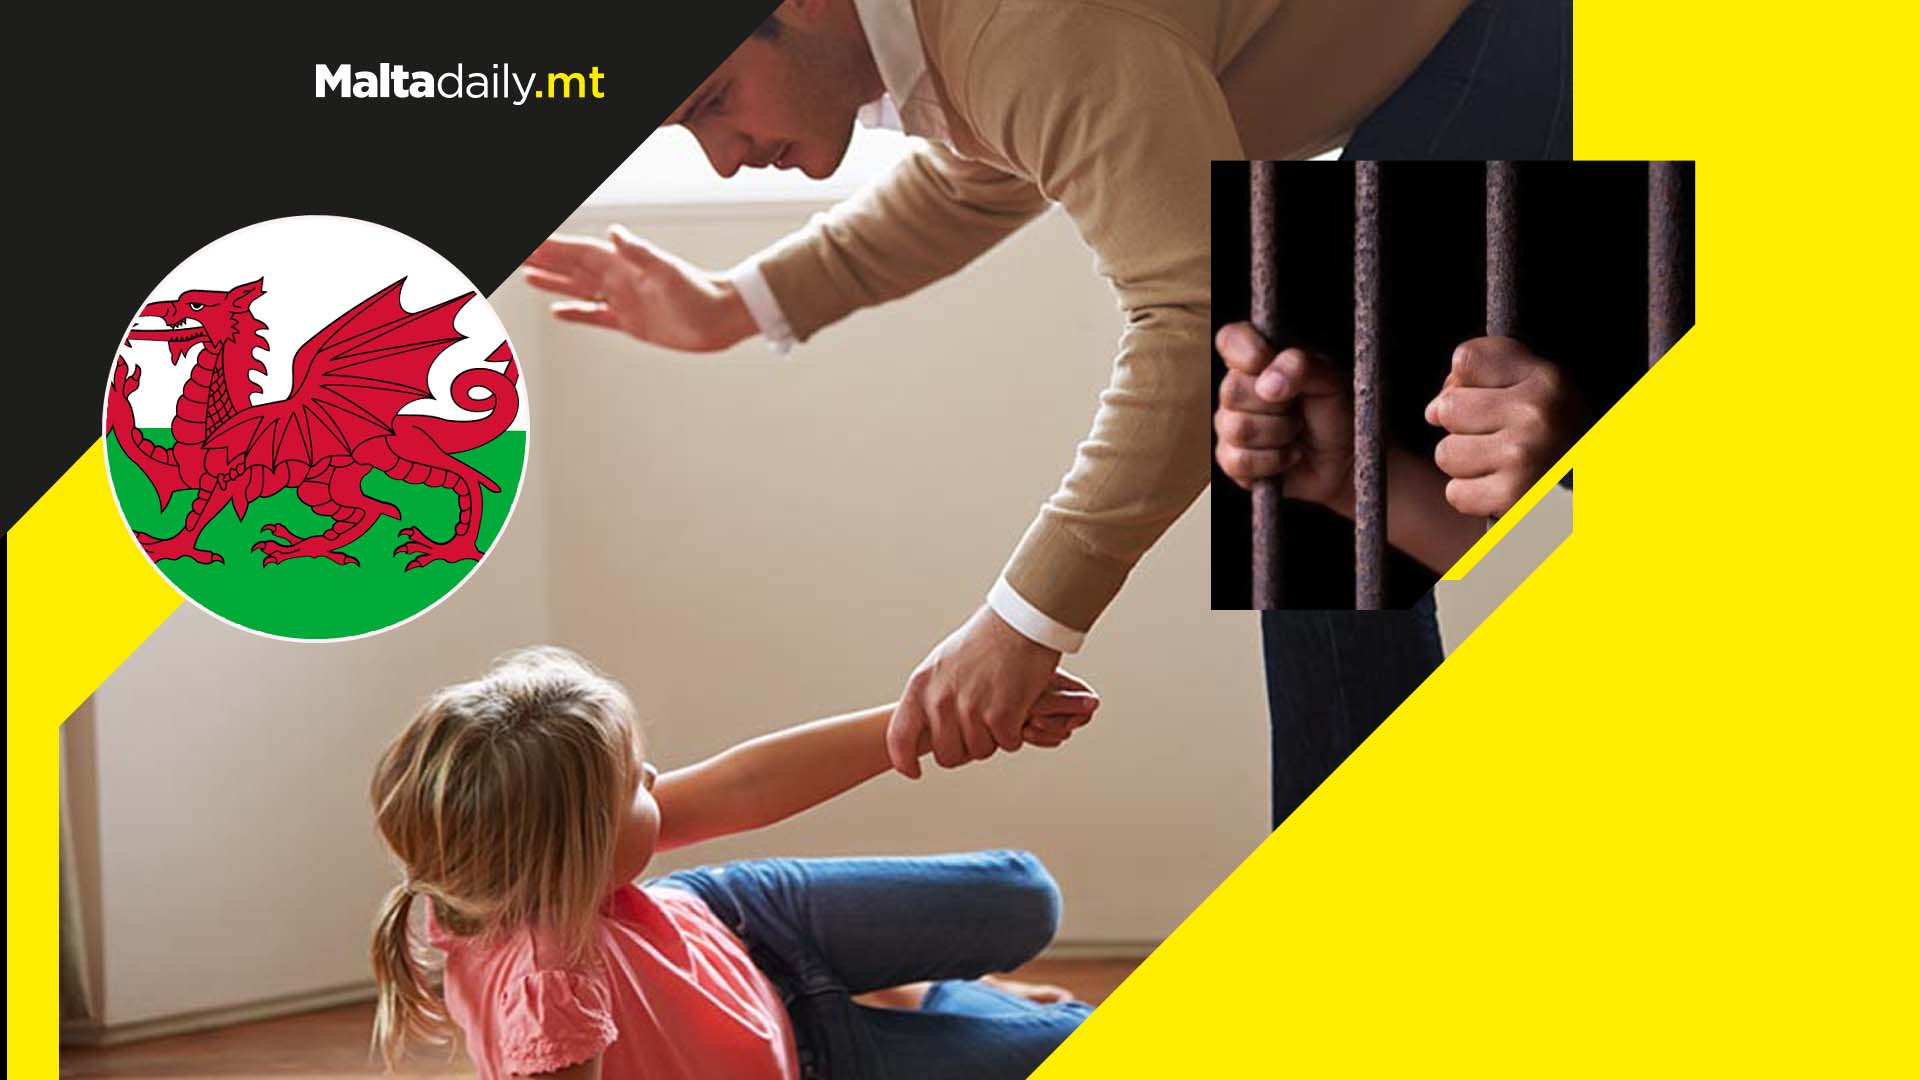 Parents in Wales could face 5 years in jail for smacking kids